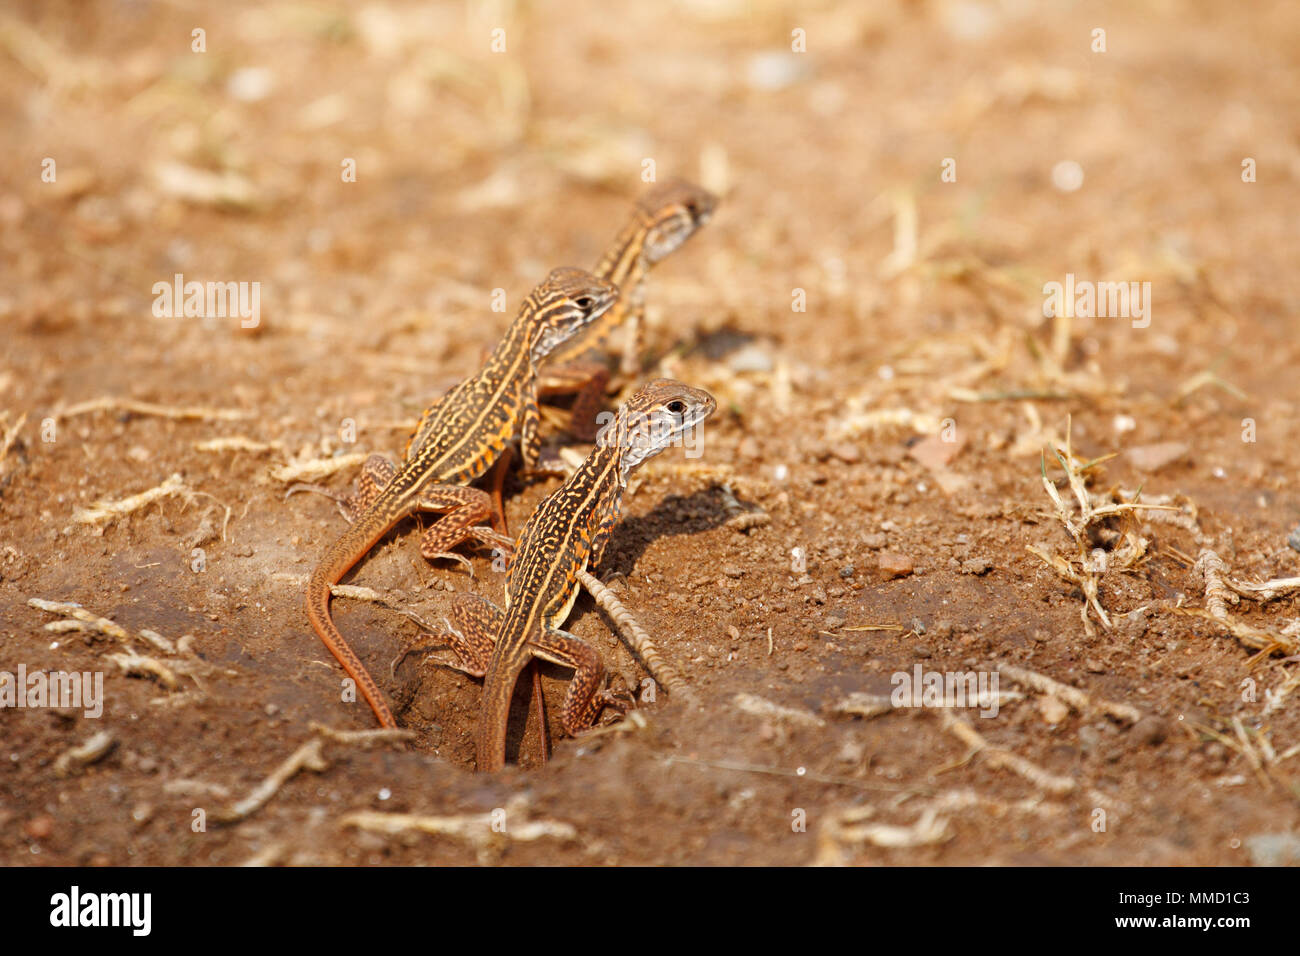 Newborn butterfly lizard /Butterfly agama (Leiolepis belliana ssp. ocellata) emerge from the hole Stock Photo